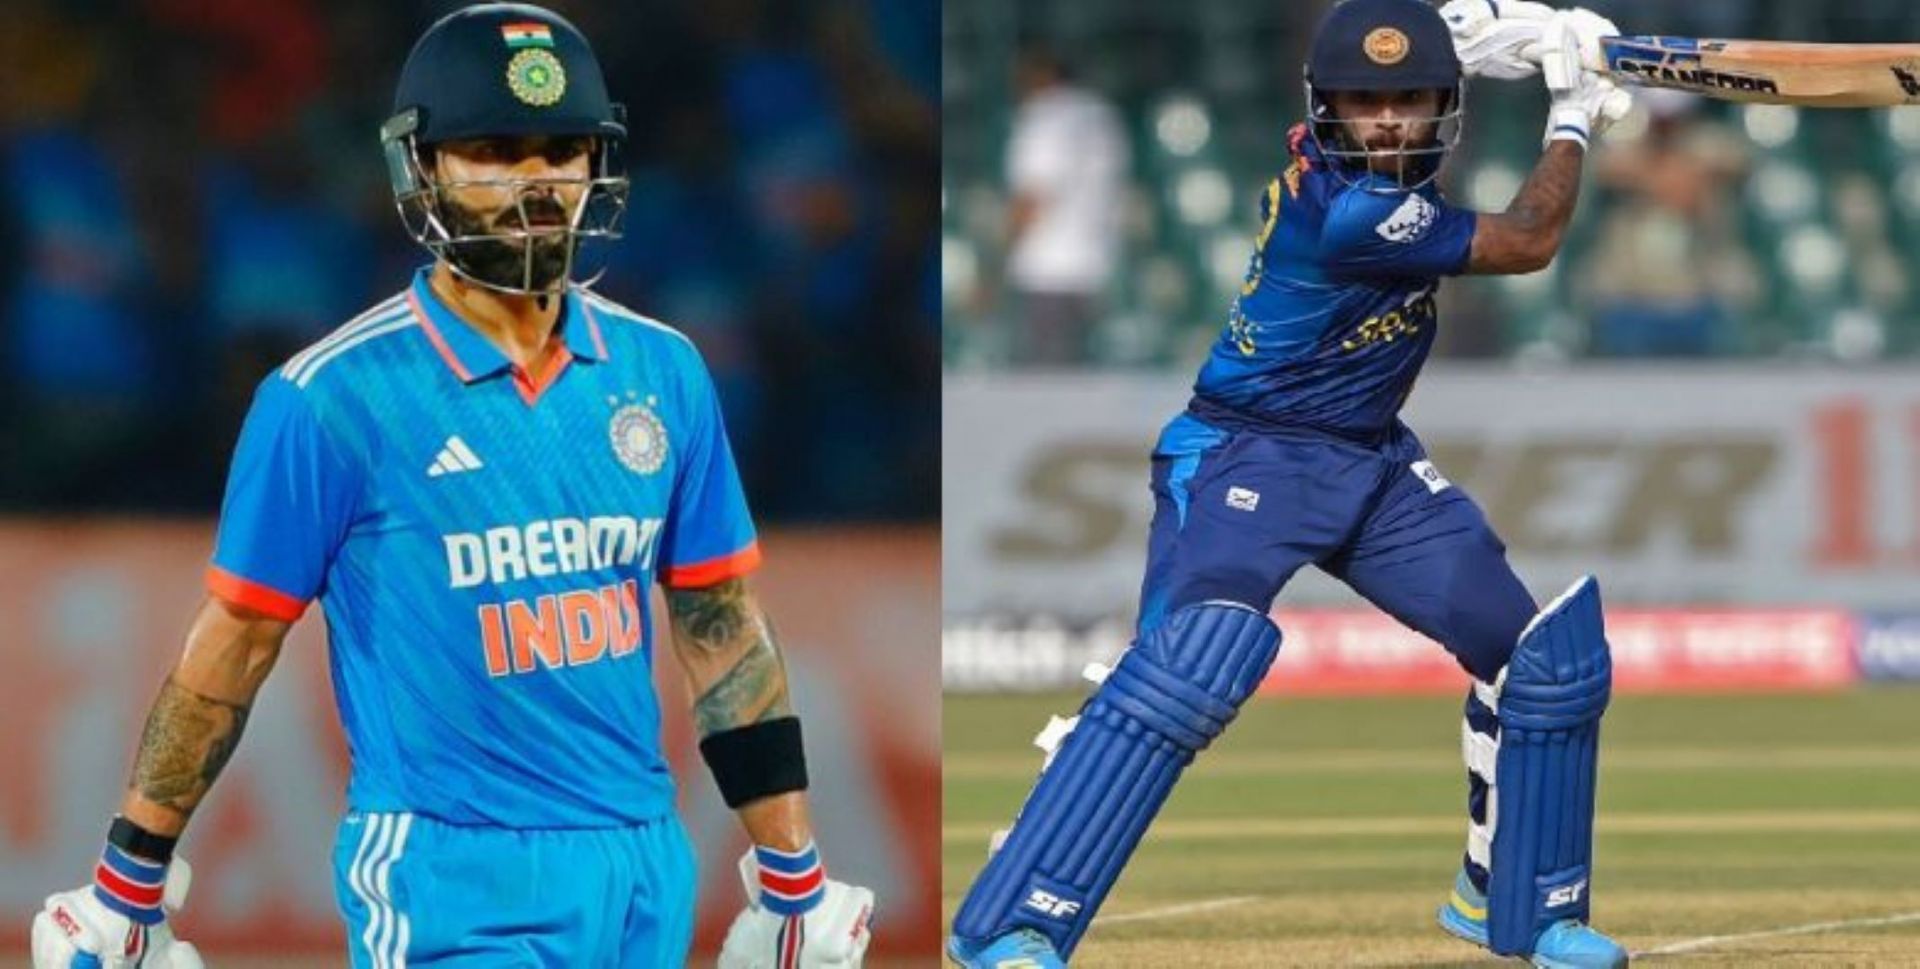 Kohli and Mendis have lit up the World Cup with their batting heroics